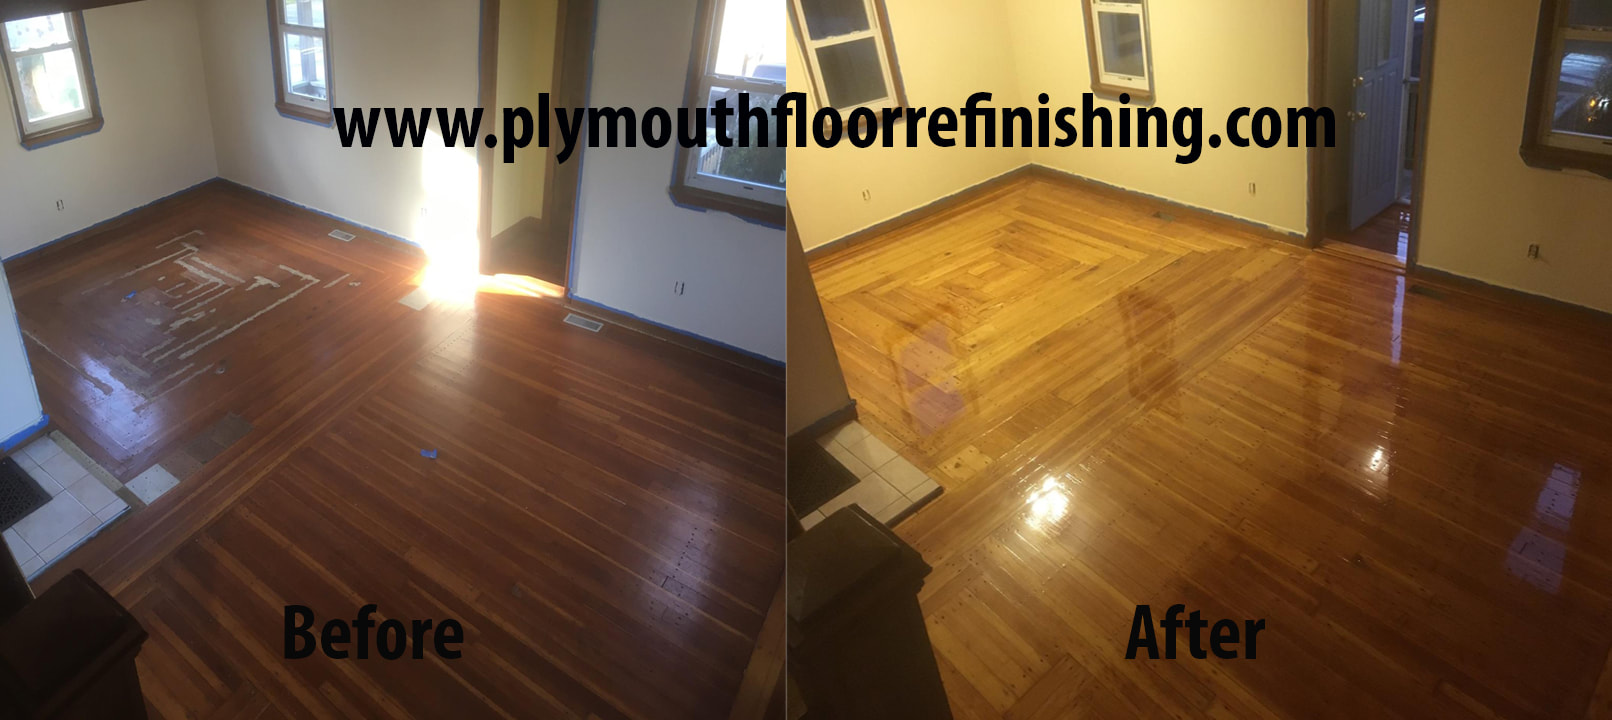 Wood floors before and after photos